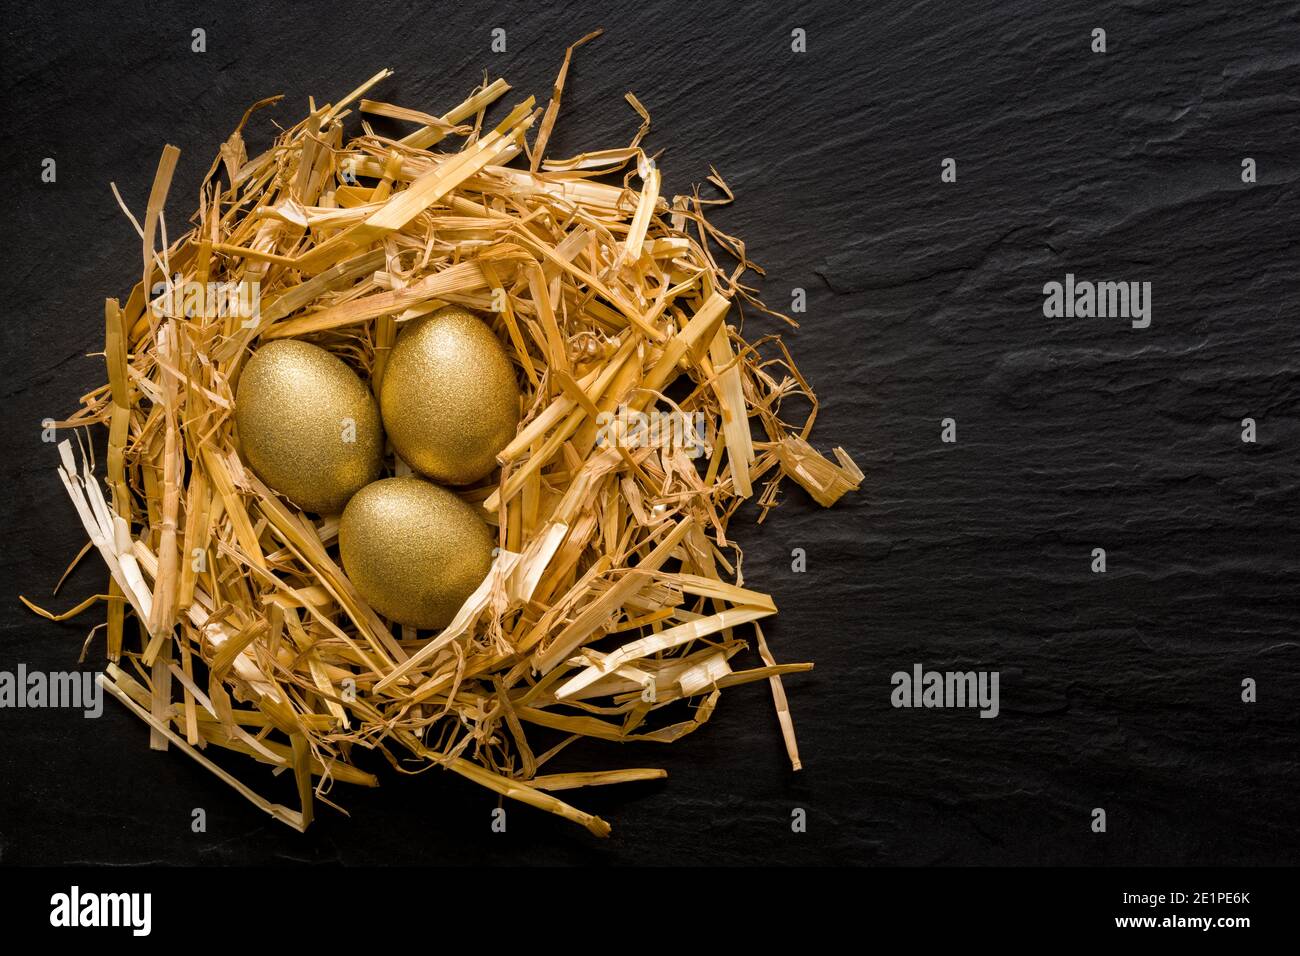 Three golden eggs in the grassy nest on black slate background with copyspace Stock Photo